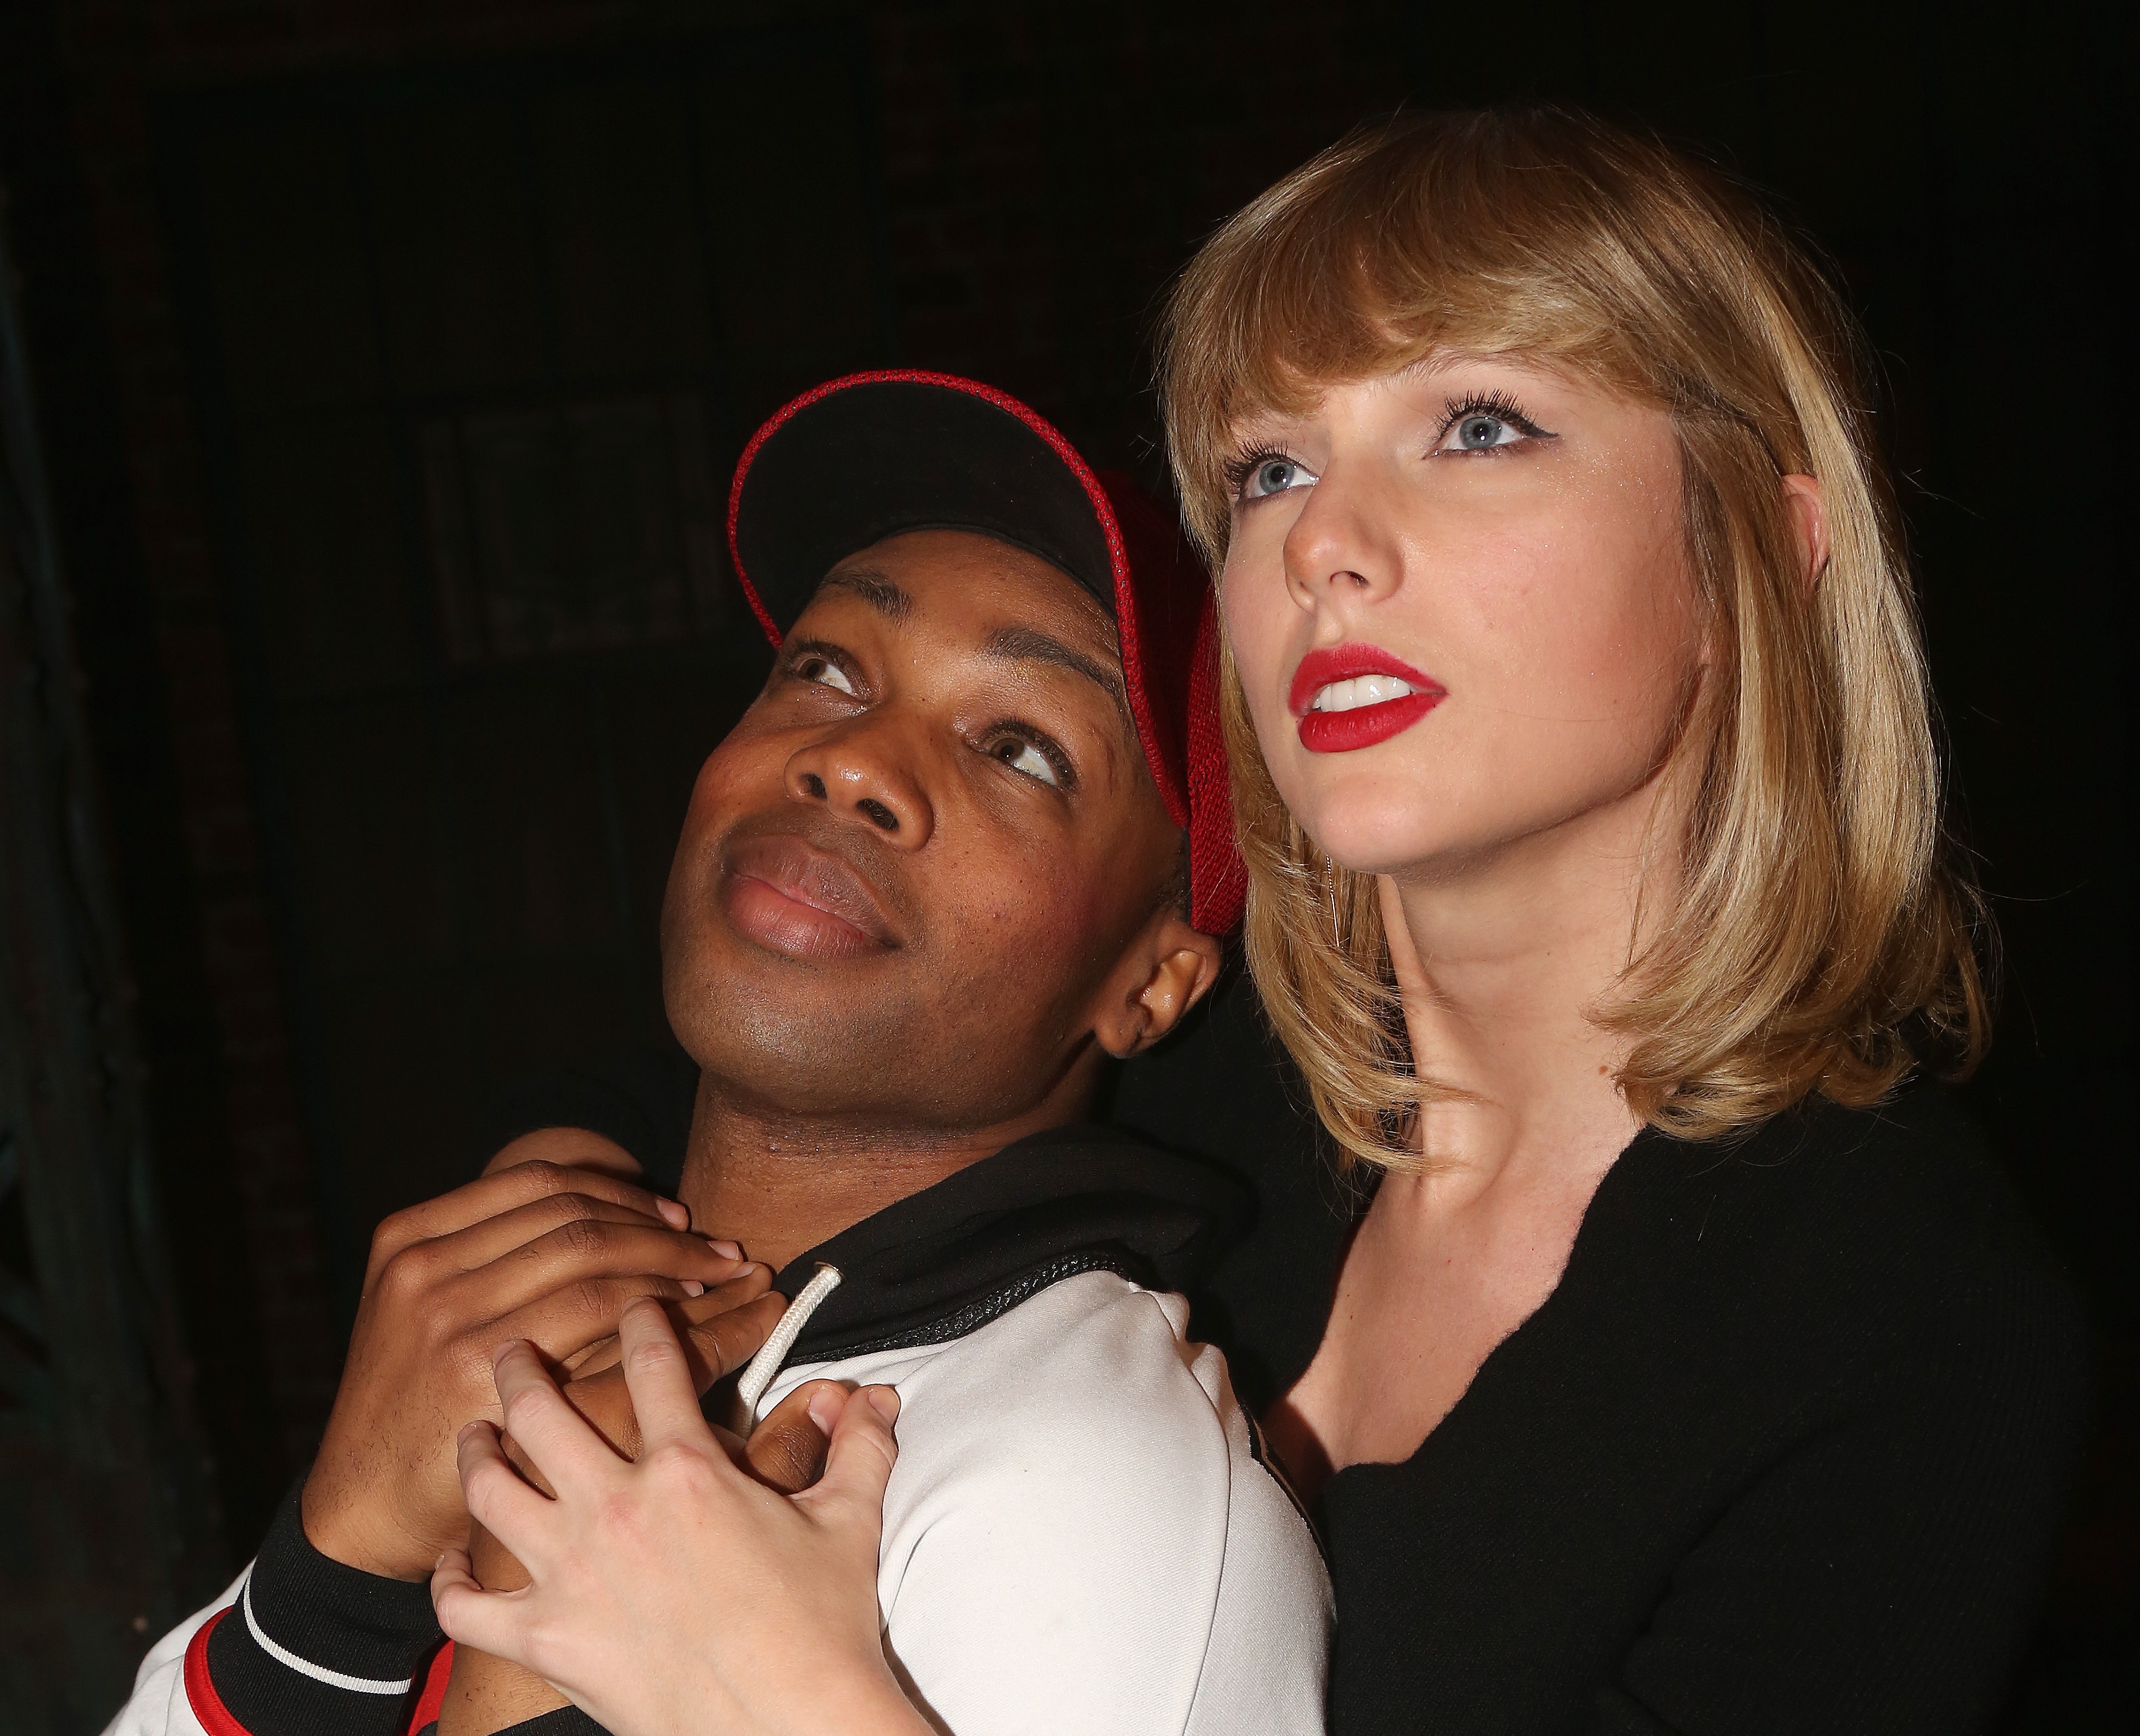 Todrick Hall and Taylor Swift pose backstage at the hit musical Kinky Boots on Broadway at The Al Hirschfeld Theater on November 23, 2016 in New York City.